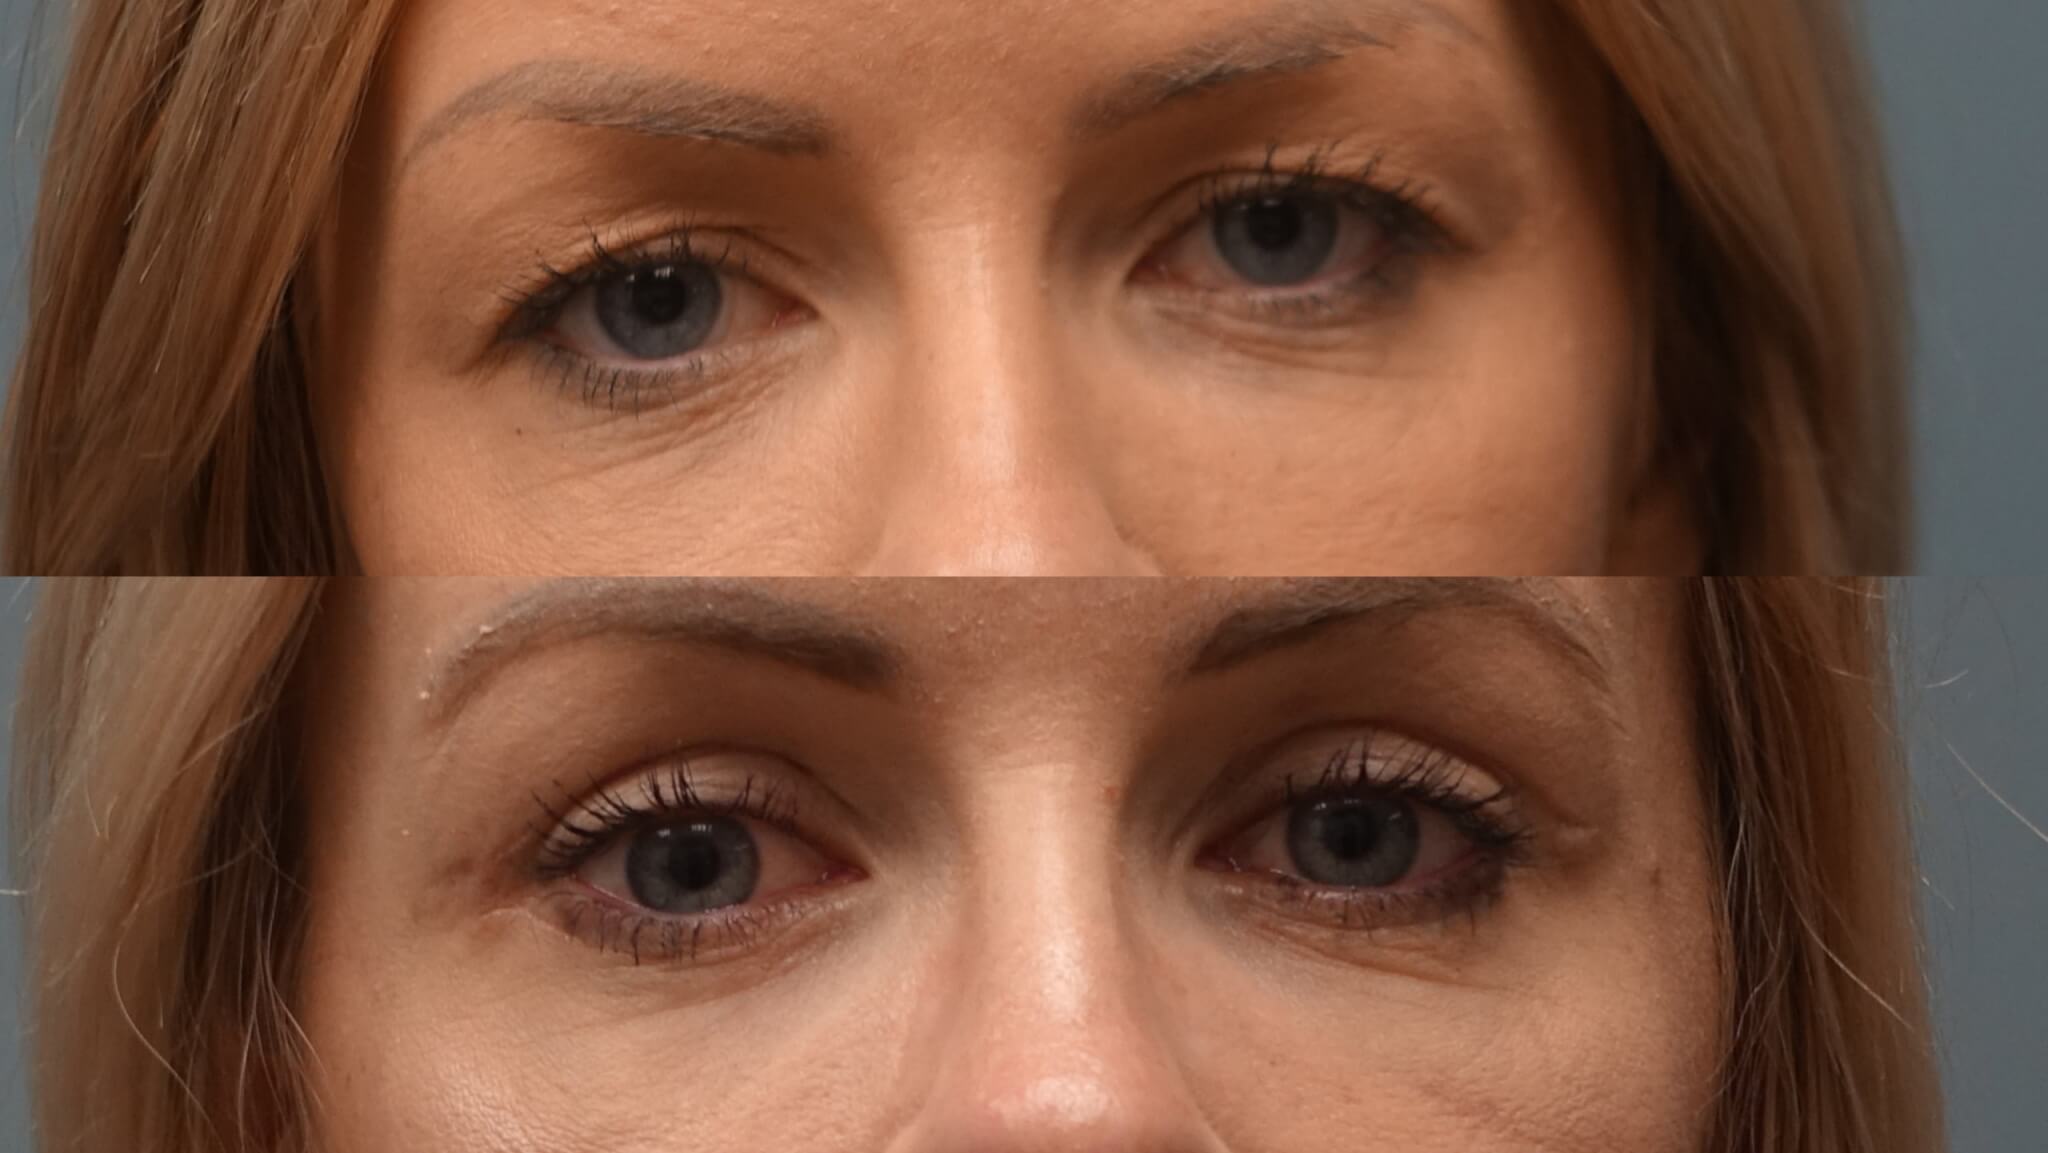 Eyelid Lift Surgery offered at Finger and Associates - Plastic Surgeon Dr. Finger offers Blepharoplasty in Savannah in Bluffton